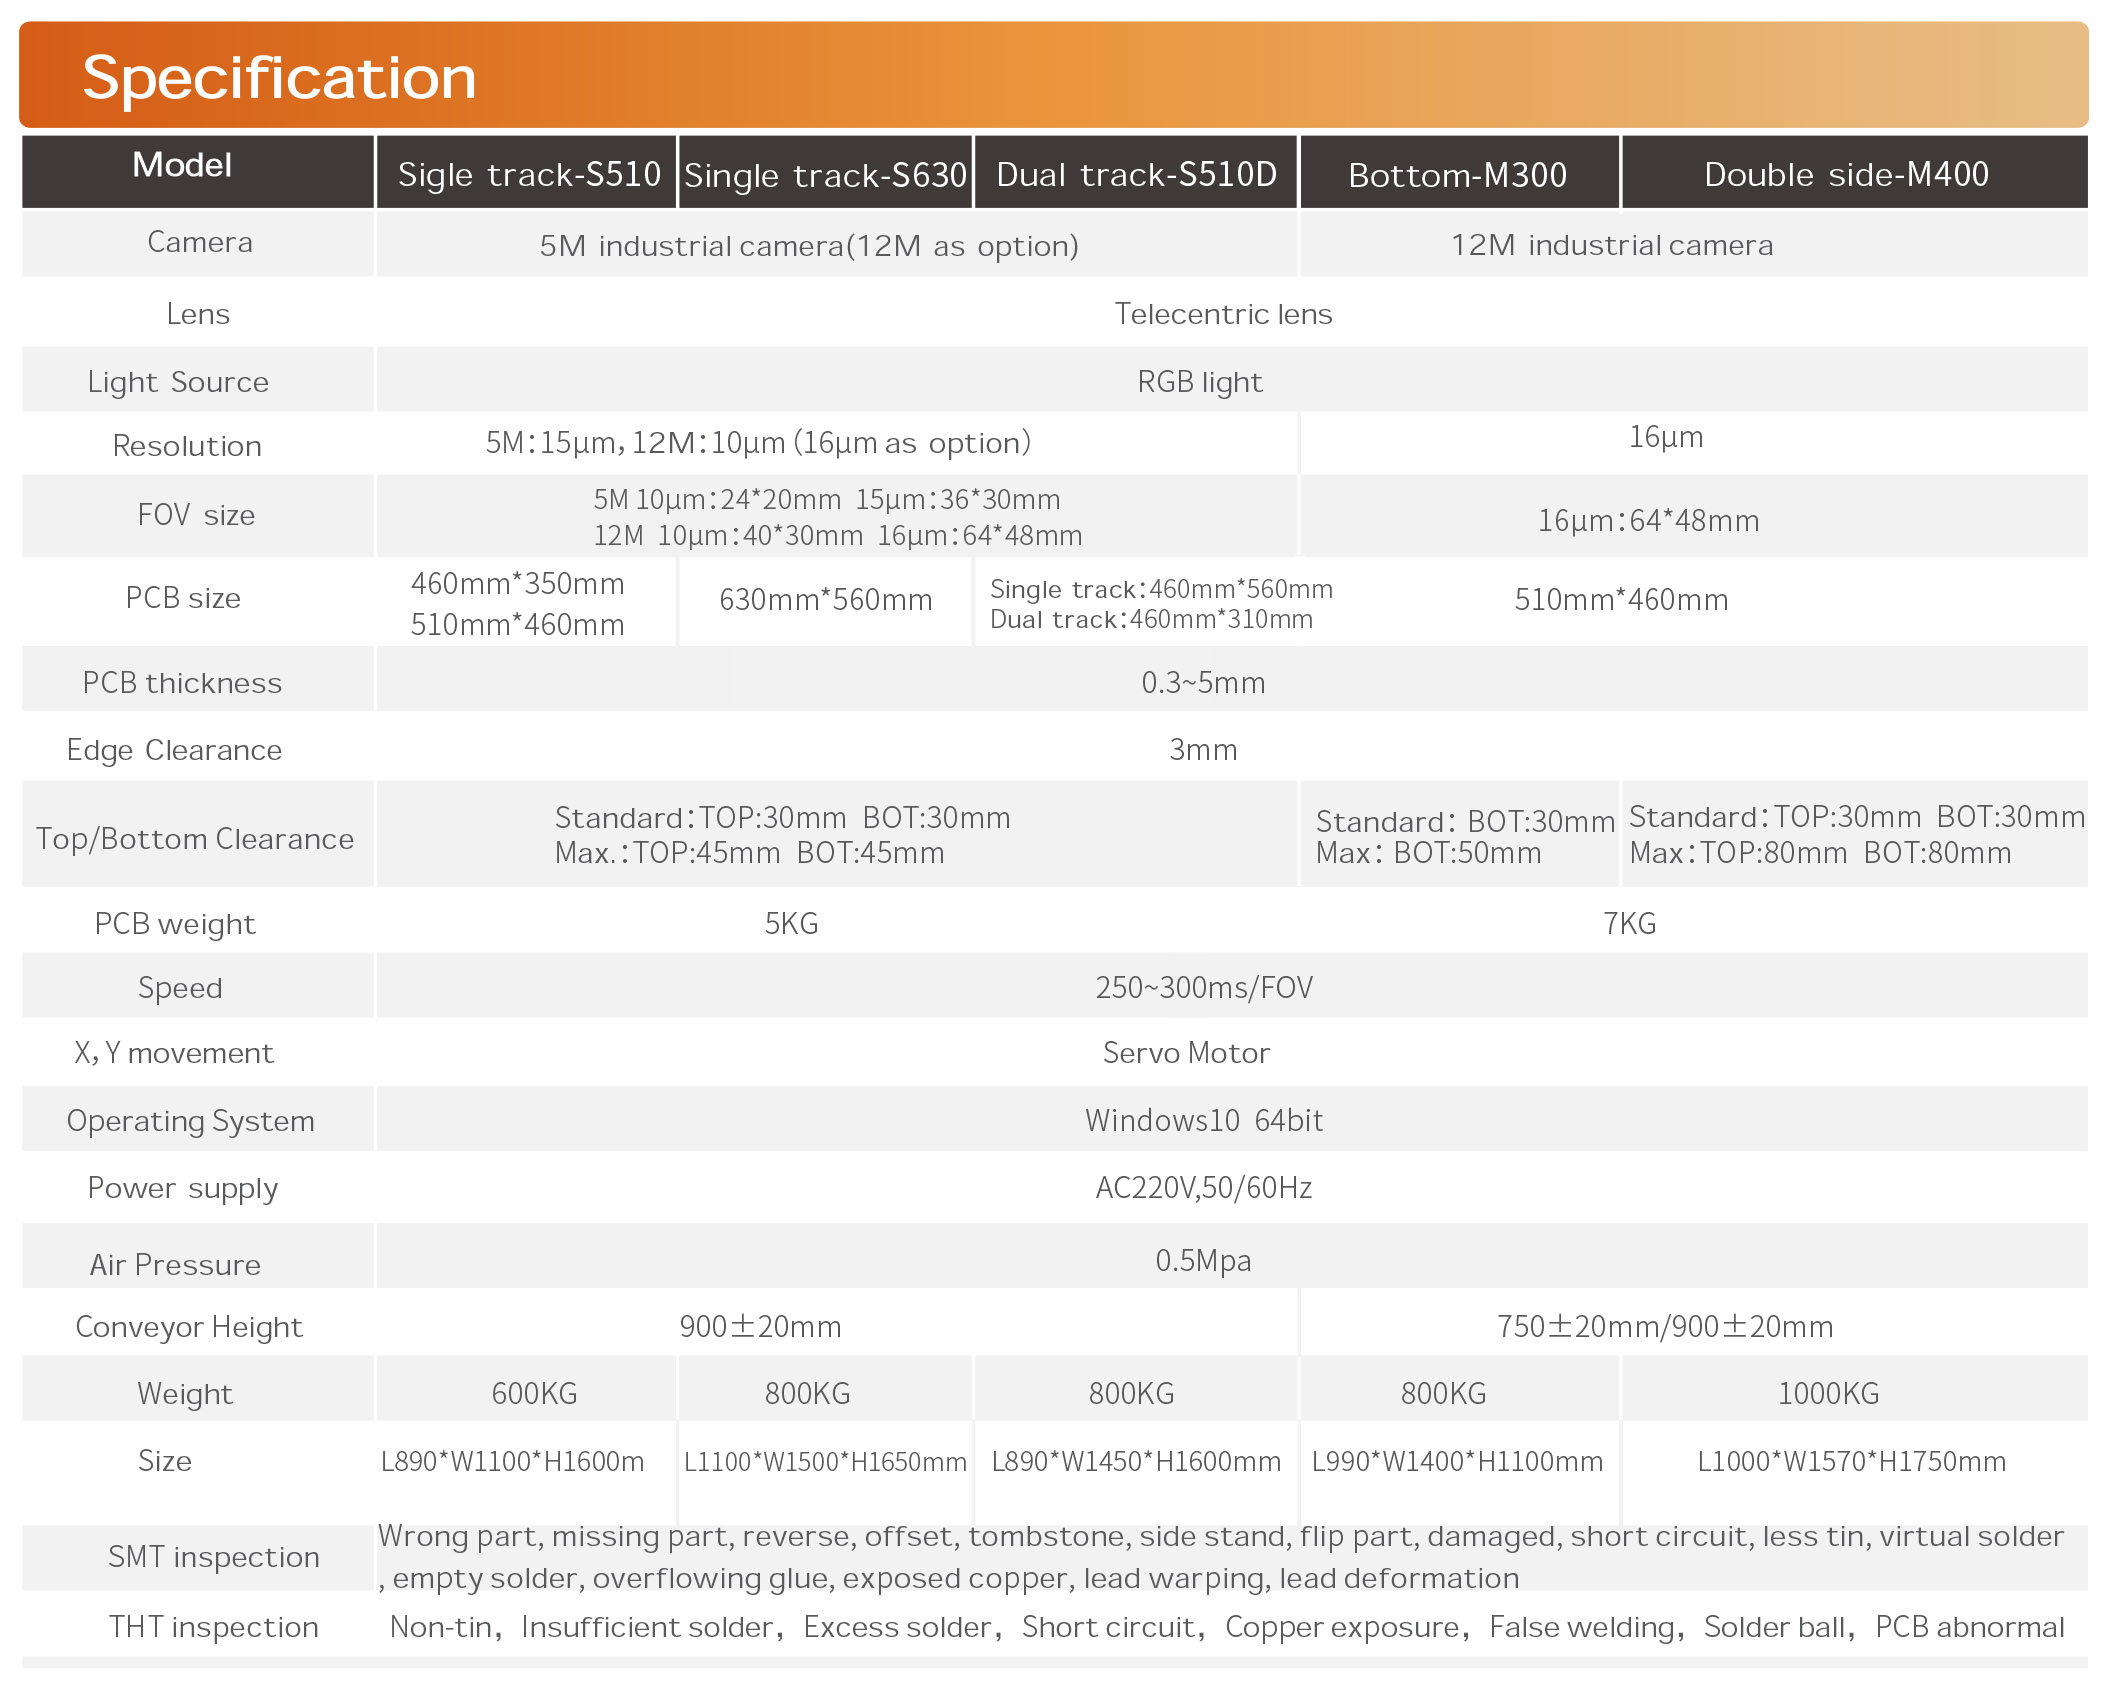 M400 Technical Specifications